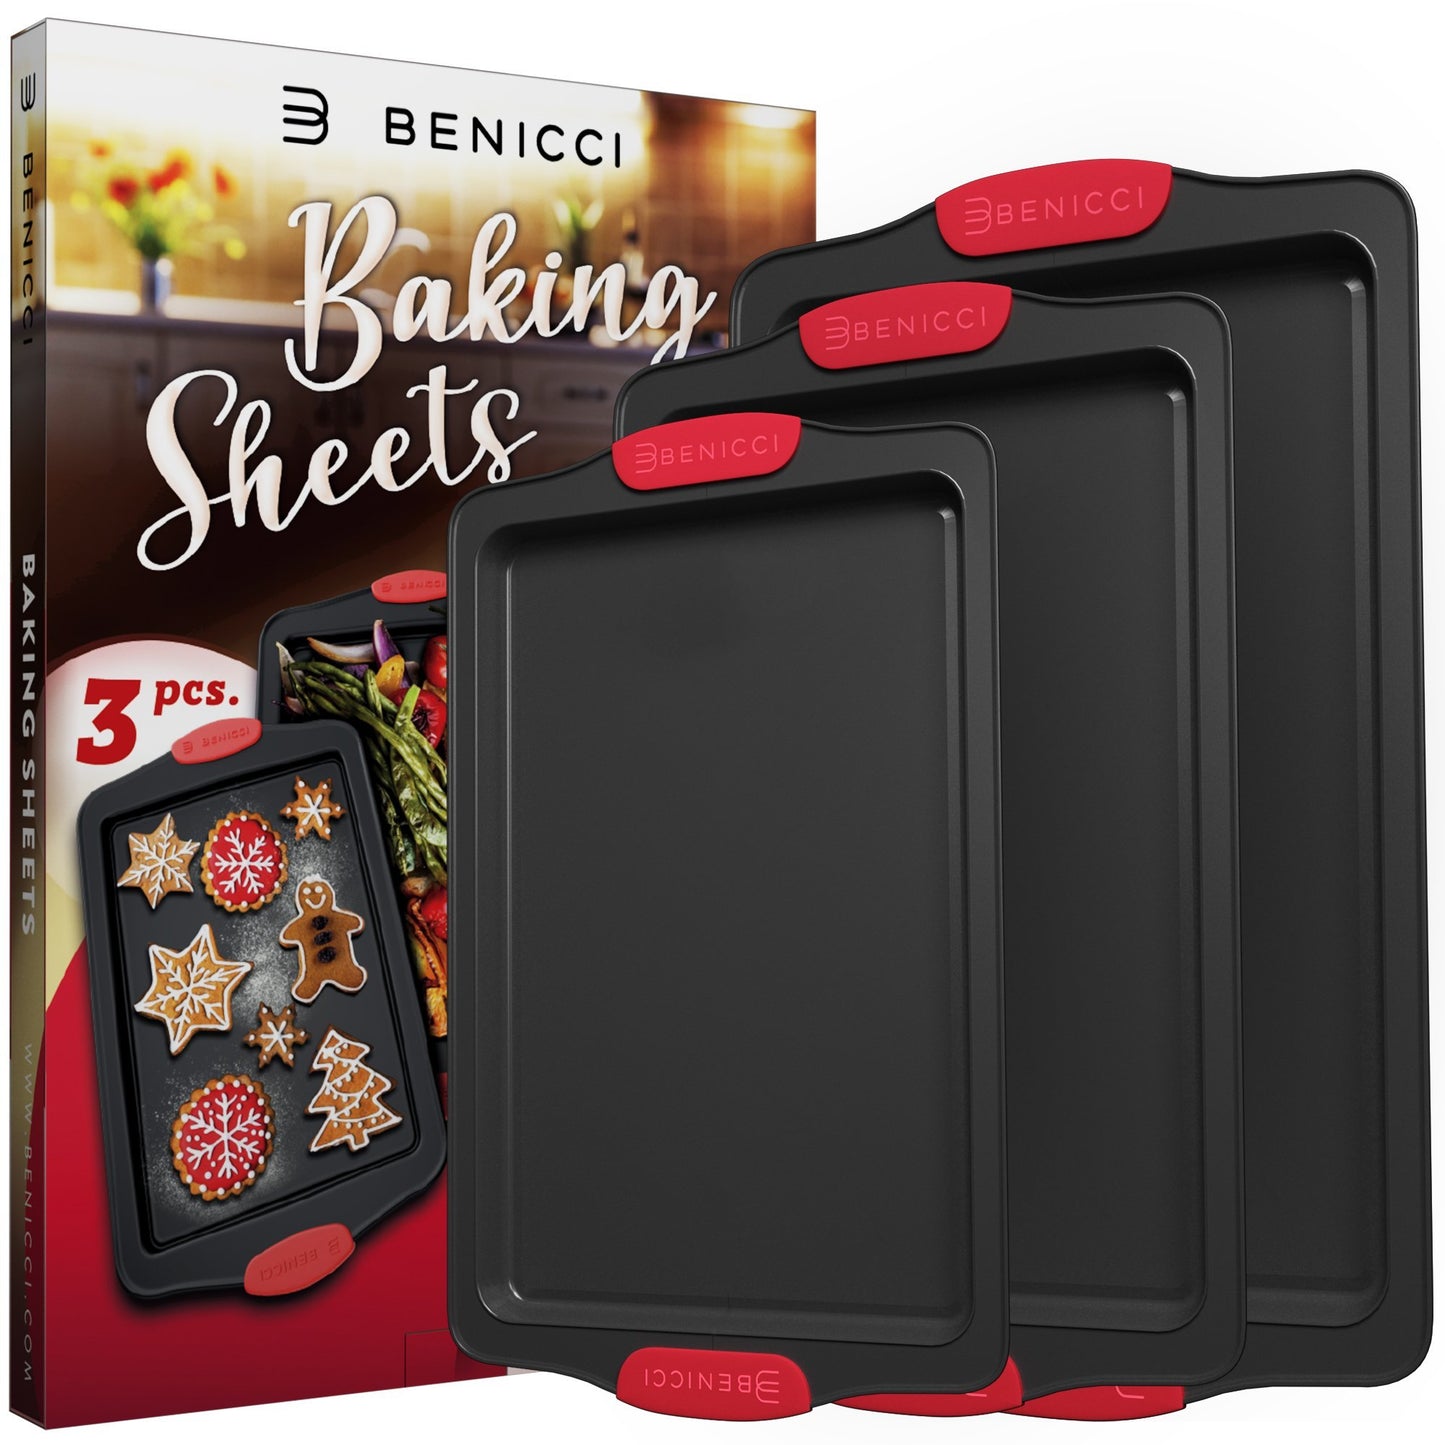 Good Cook Set Of 3 Non-Stick Cookie Sheet 